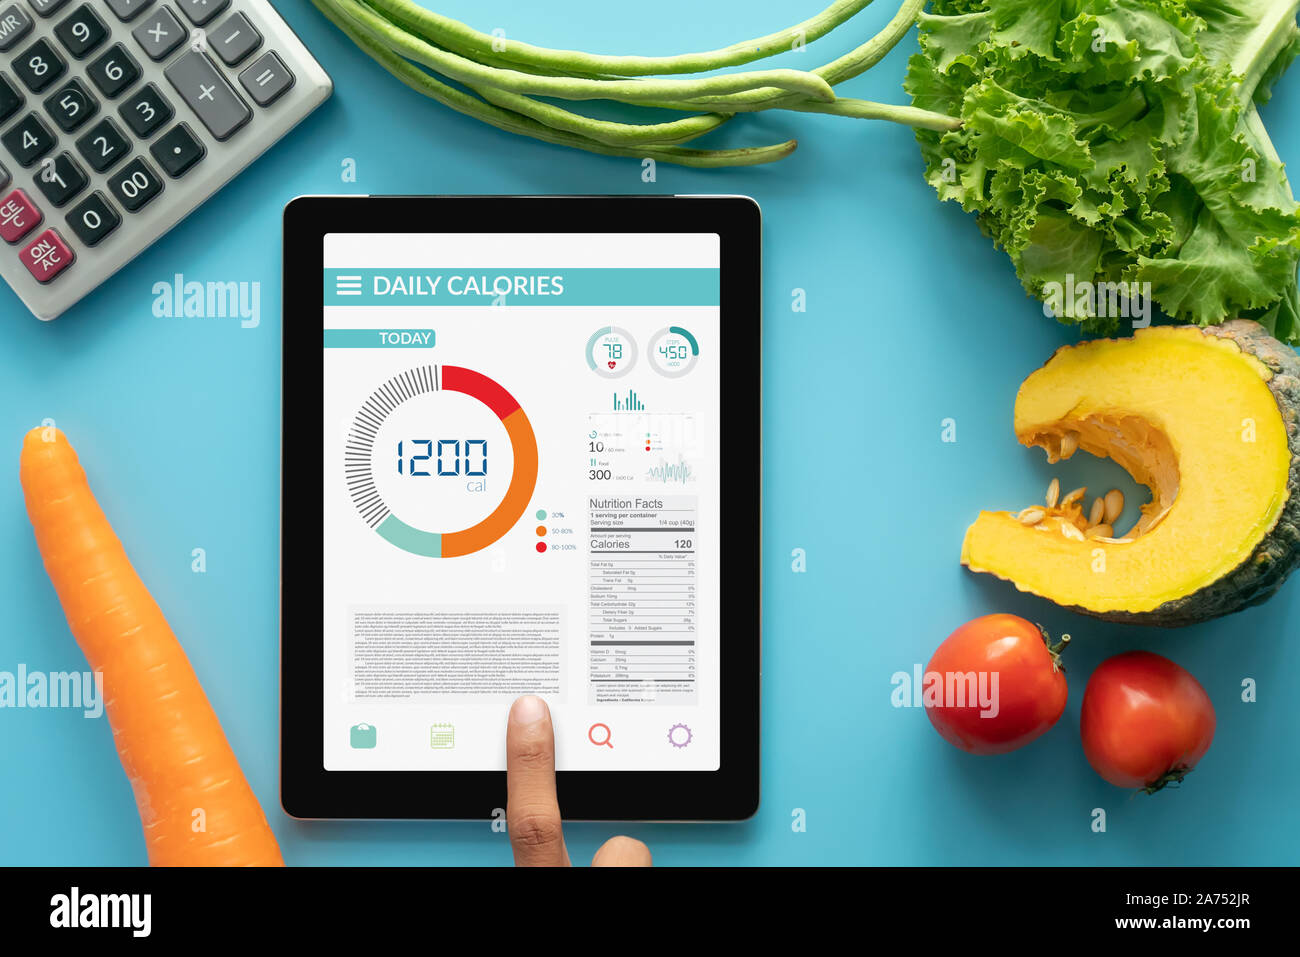 Calories counting , diet , food control and weight loss concept. woman using Calorie counter application on tablet at dining table with fresh vegetabl Stock Photo